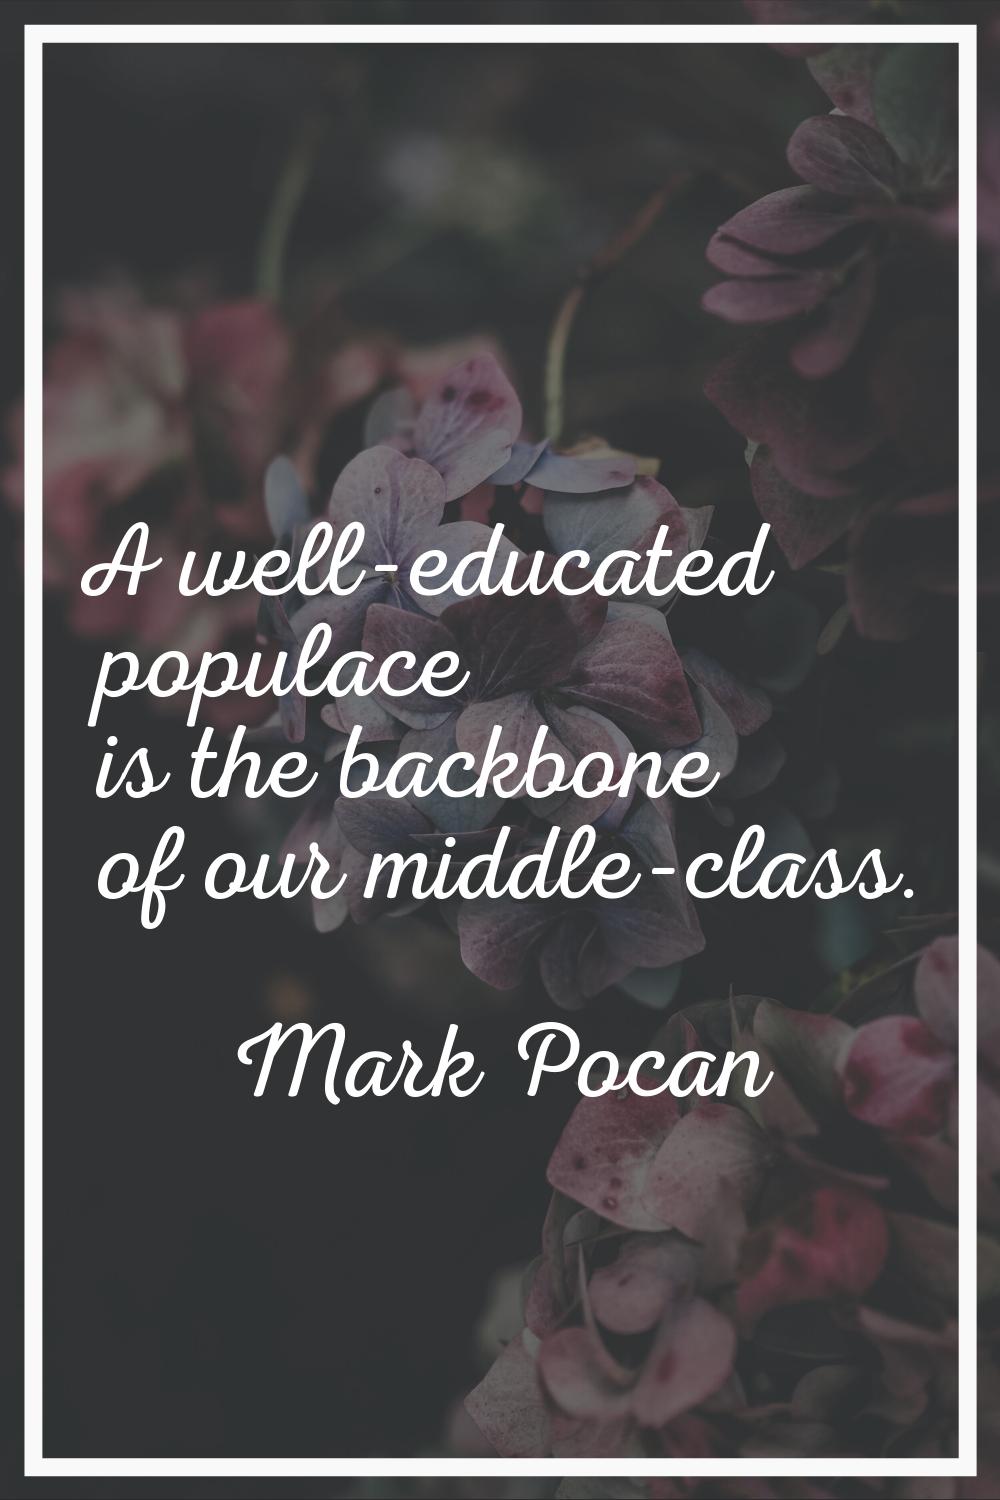 A well-educated populace is the backbone of our middle-class.